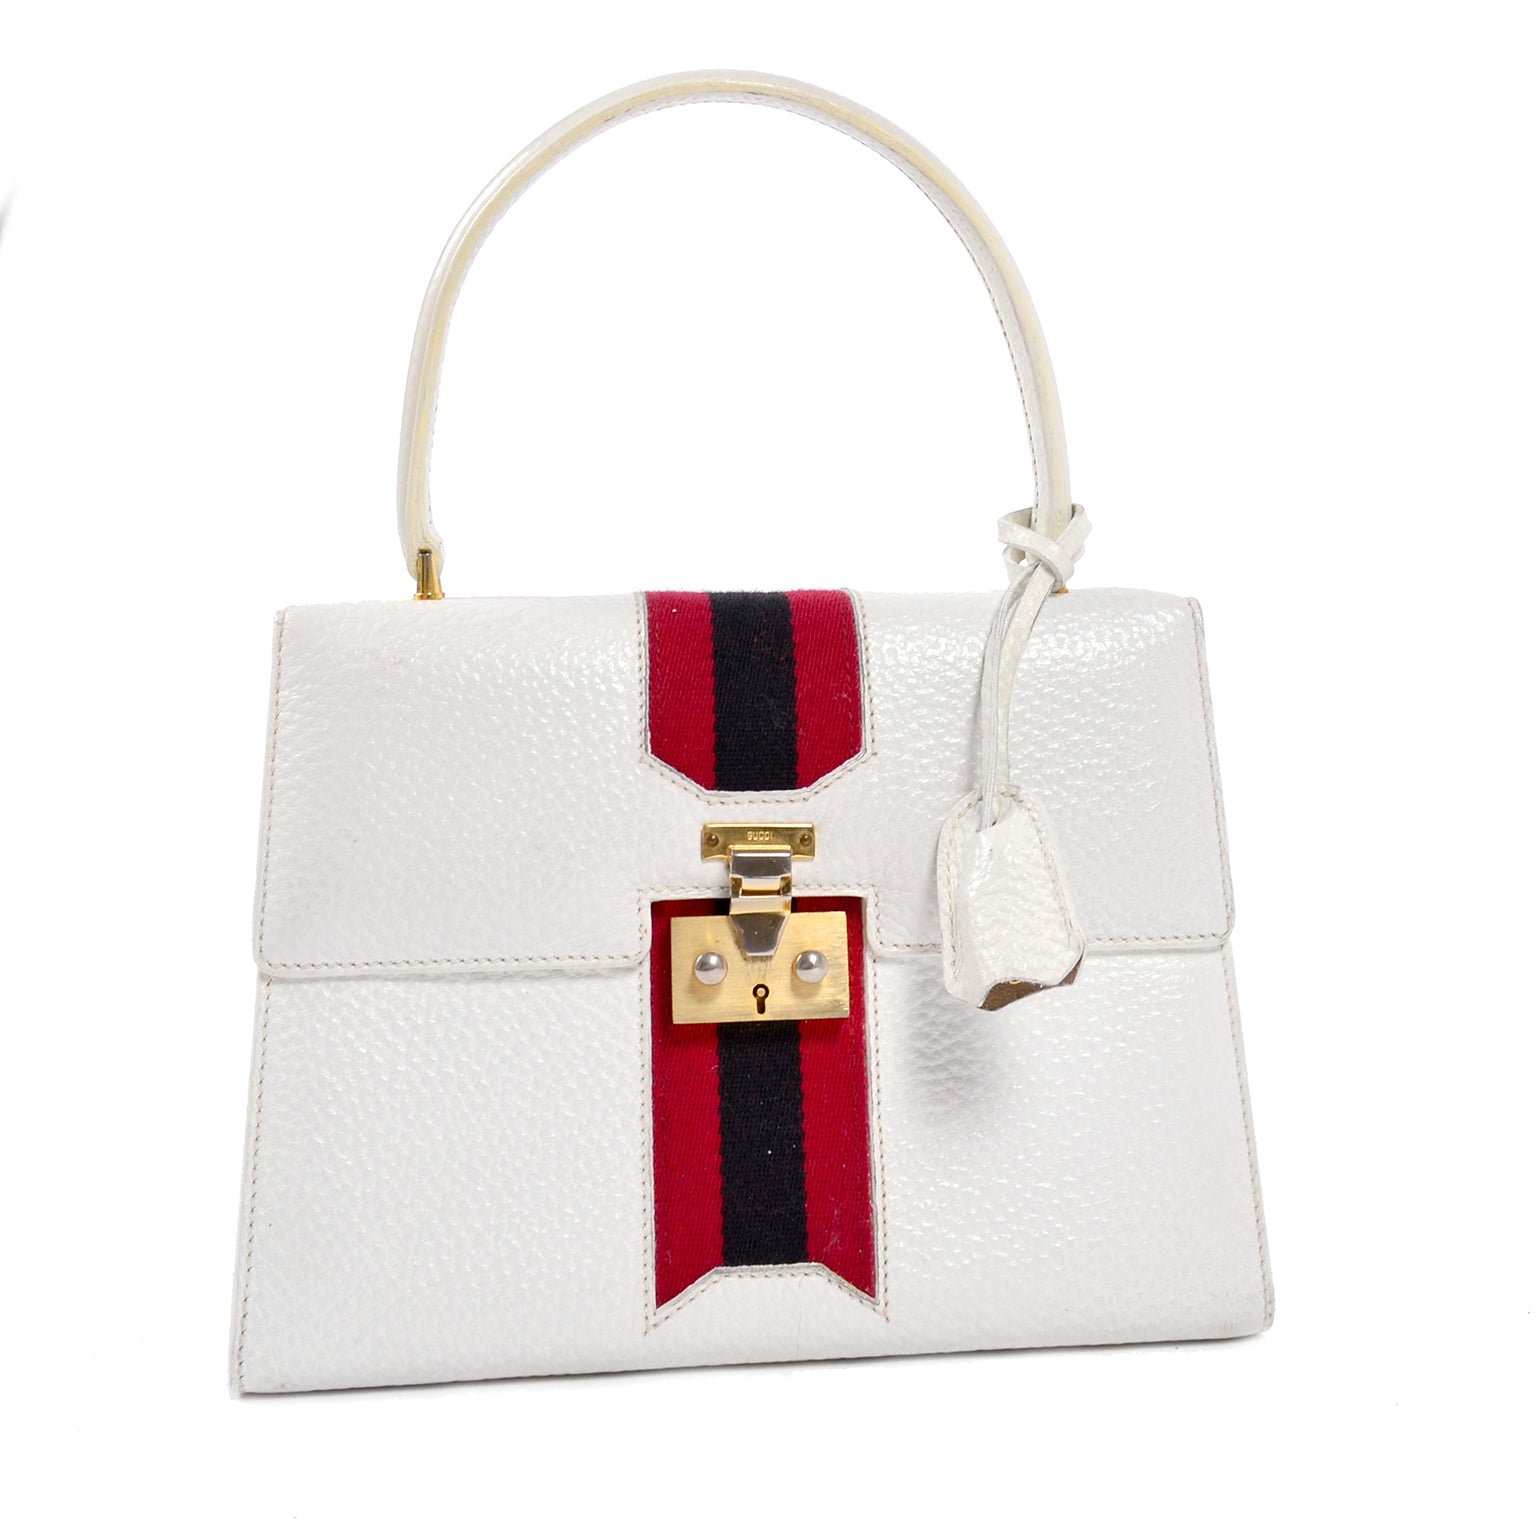 Gucci Padlock Bag: A Fusion of Classic Style And Fashion Trends – Best  Selling Gucci Bag Review